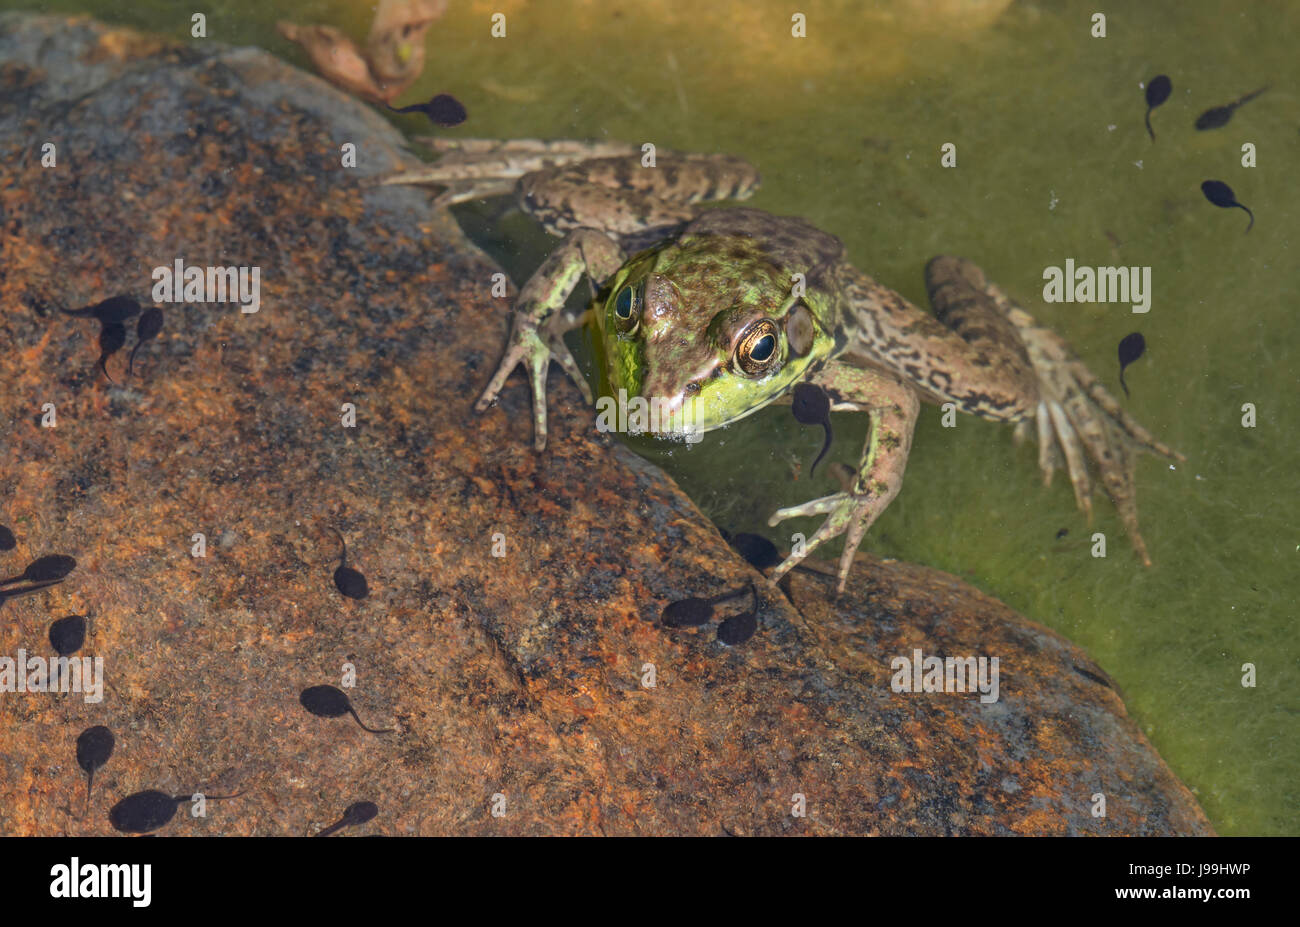 Green Frog (Lithobates clamitans) resting on rock in pond, with toad tadpoles, E USA Stock Photo